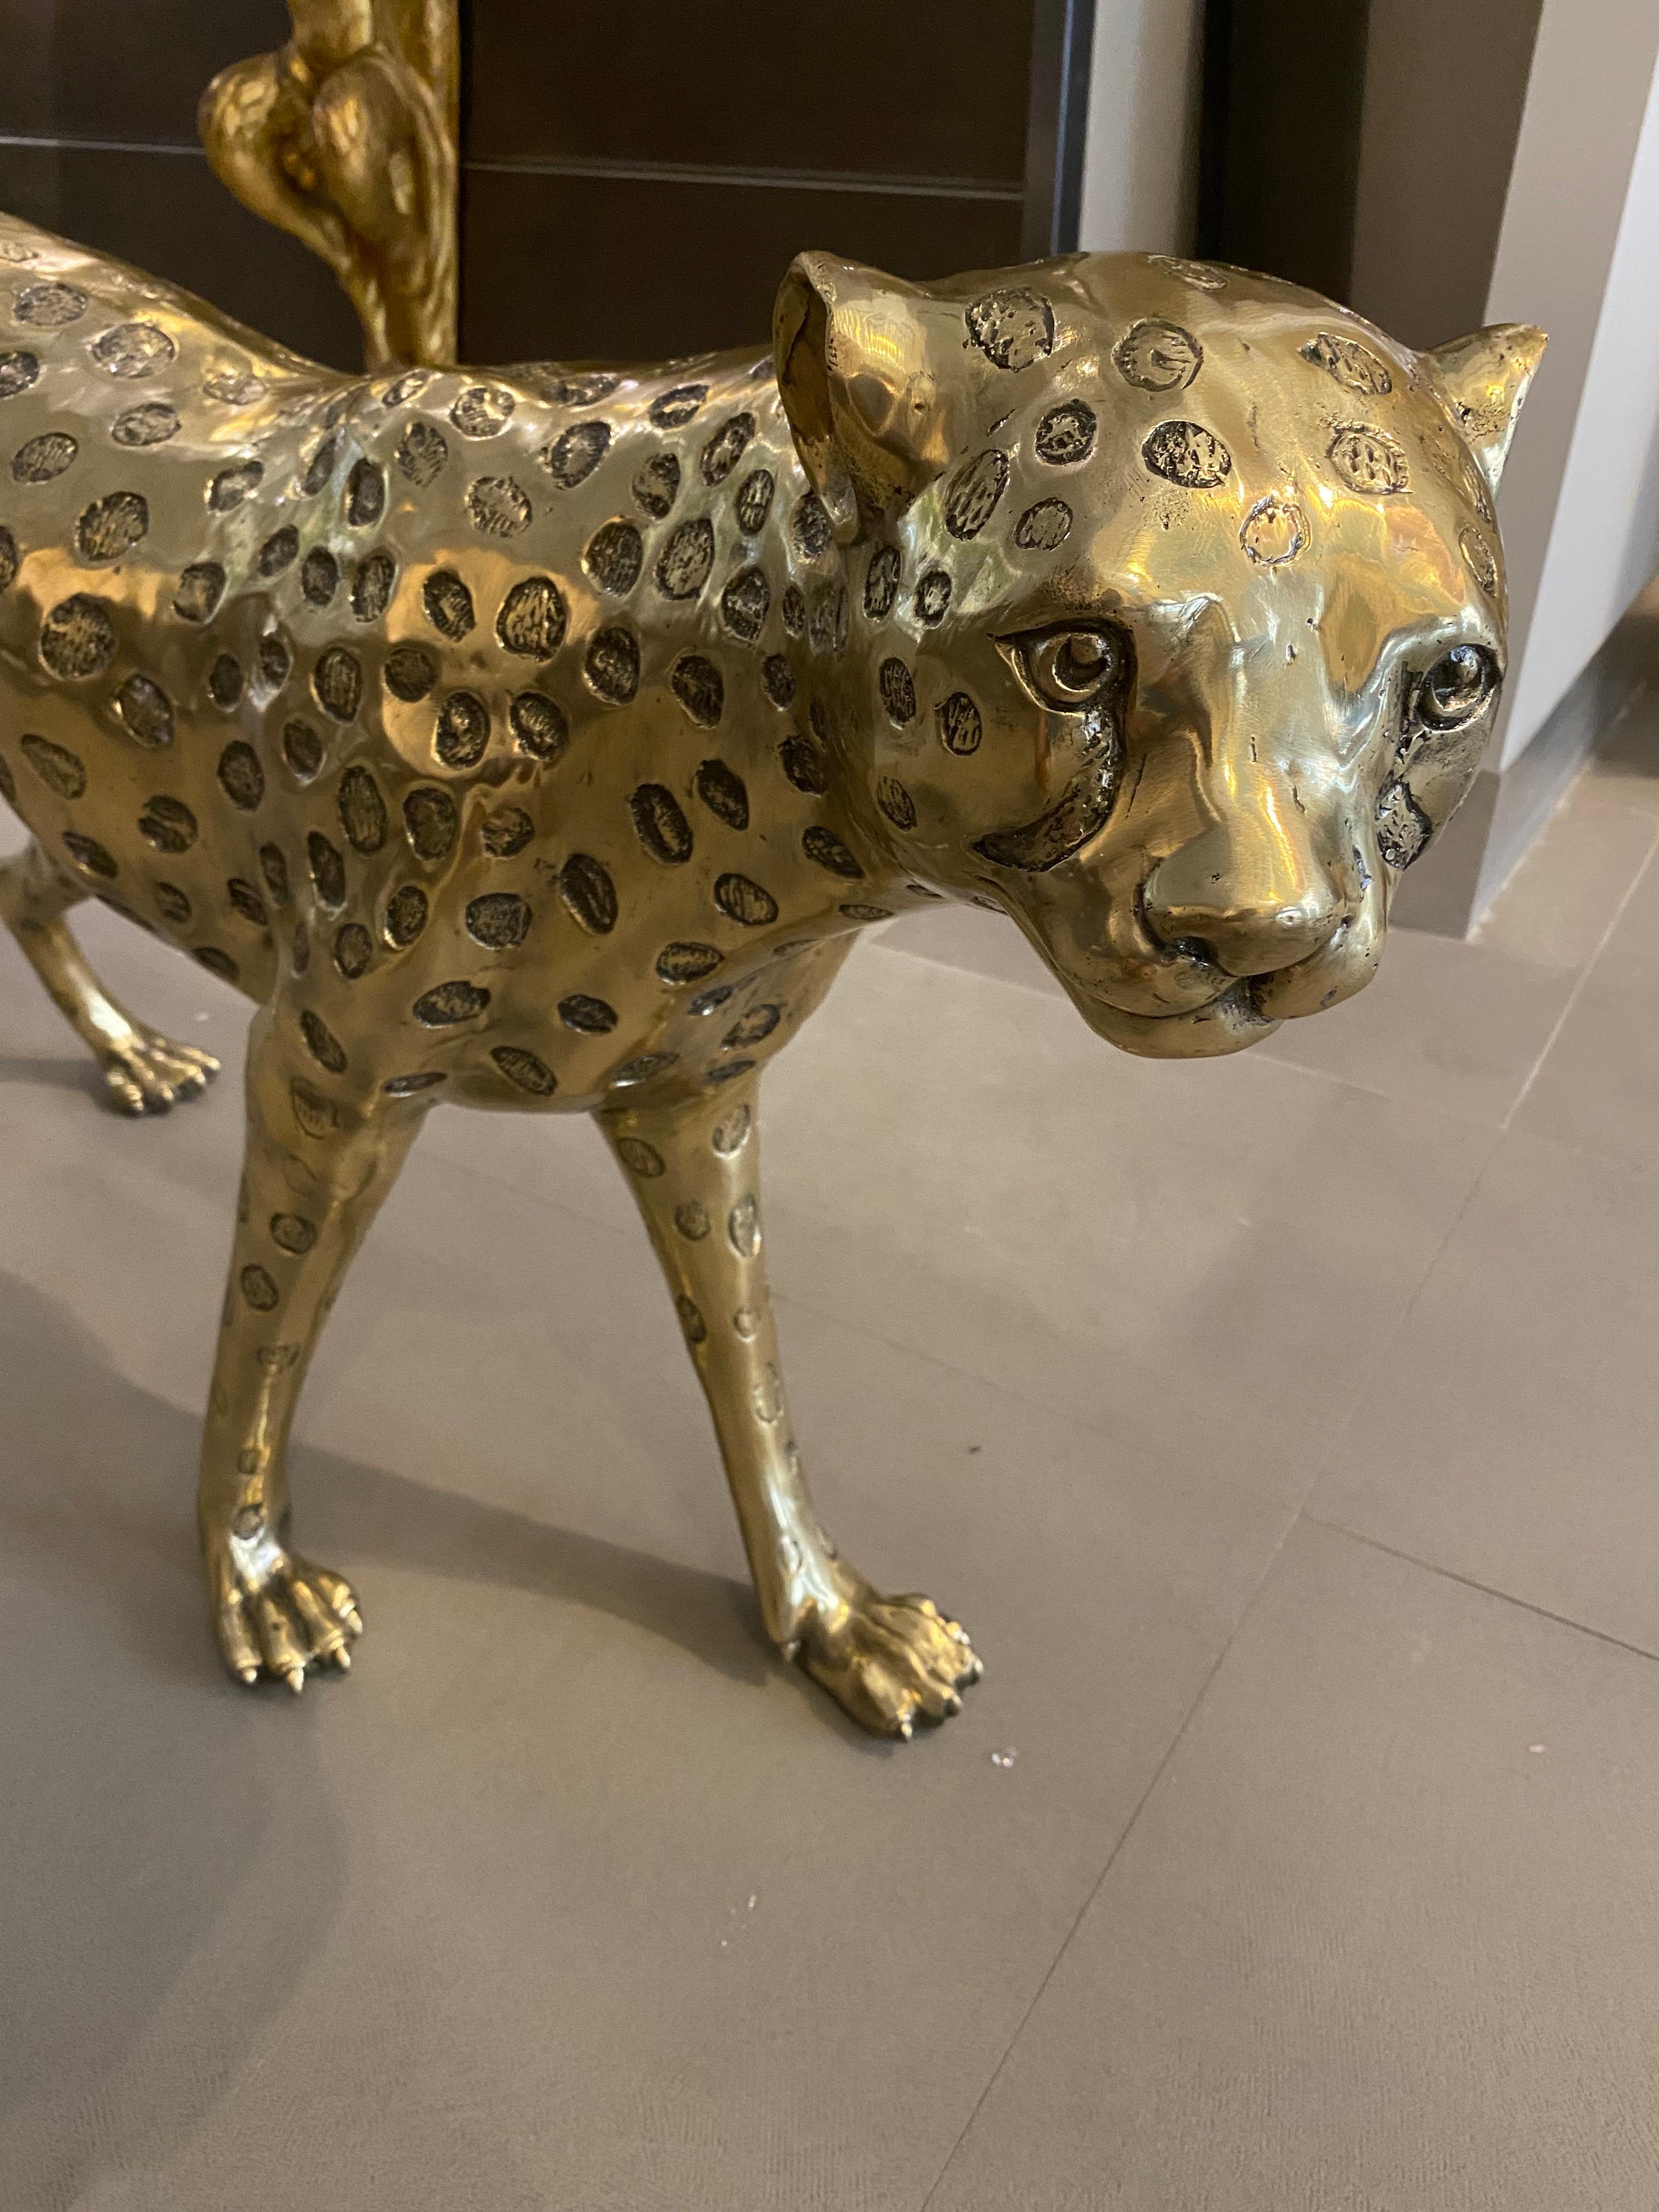 Fantastic gilt grass leopard sculpture . The item will be well-suited to either an indoor or outdoor setting.